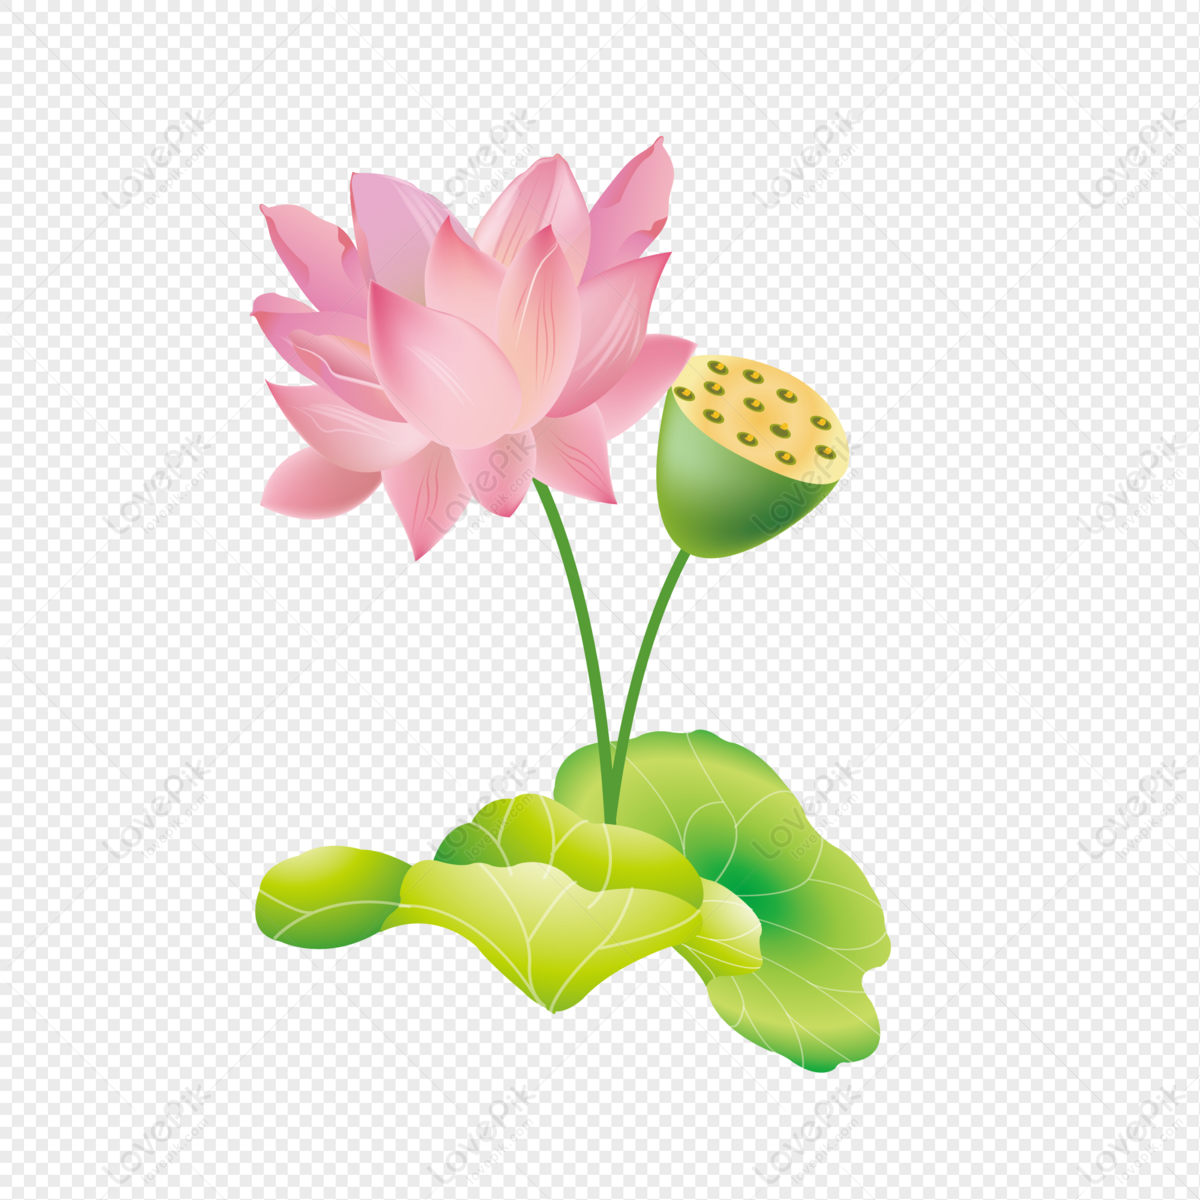 Lotus PNG Images With Transparent Background | Free Download On ...